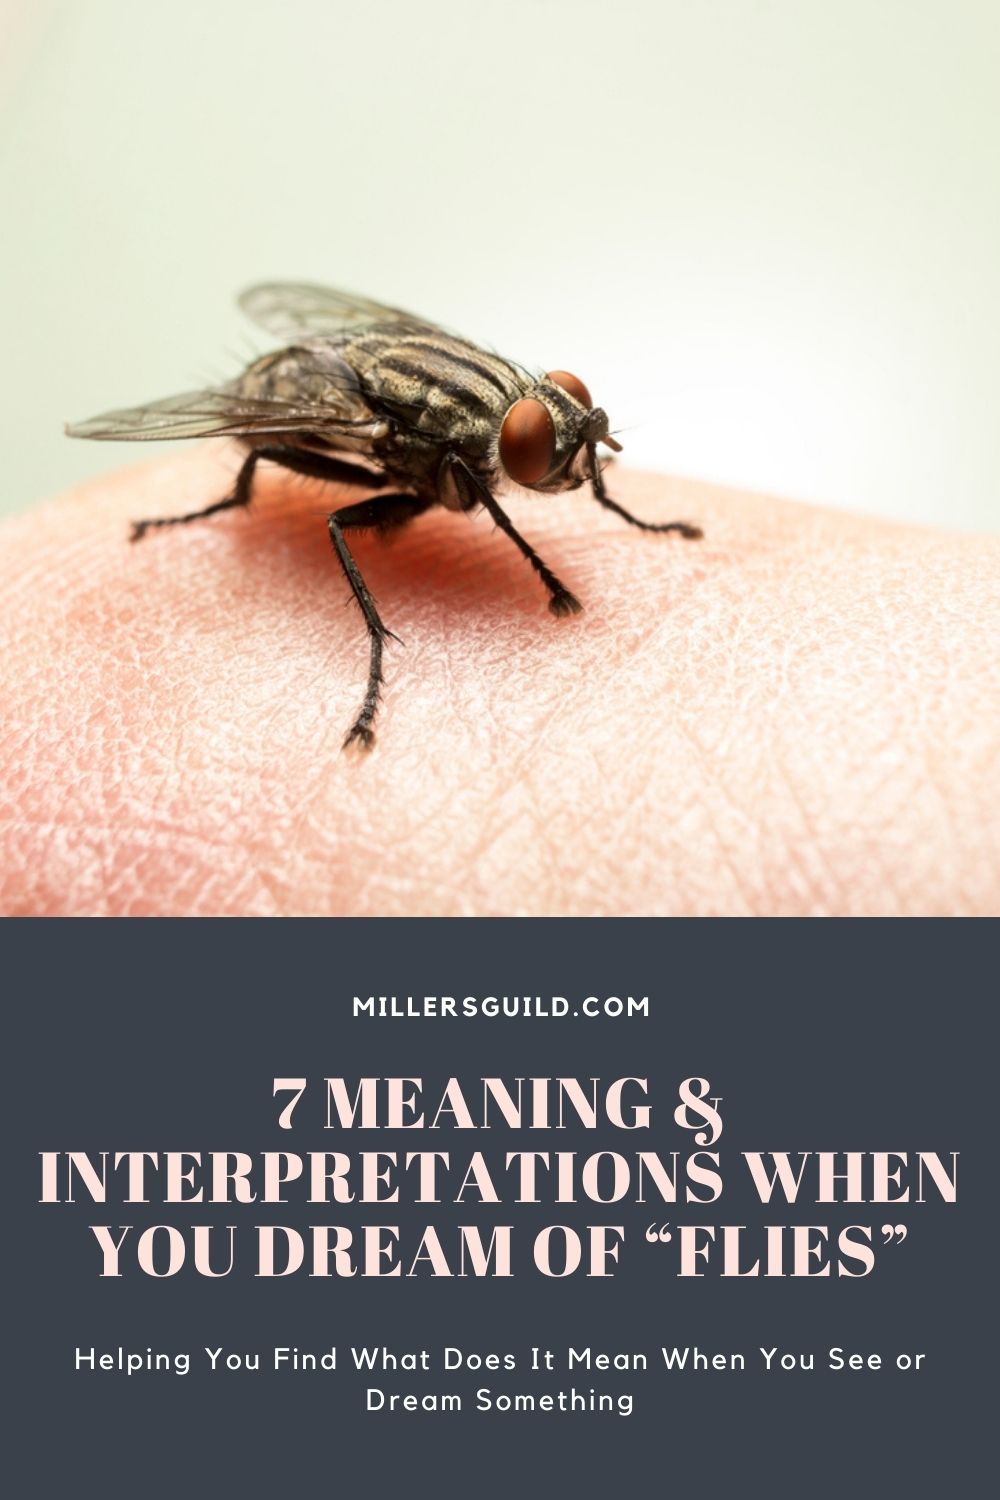 7 Meaning & Interpretations When You Dream of “Flies” 1